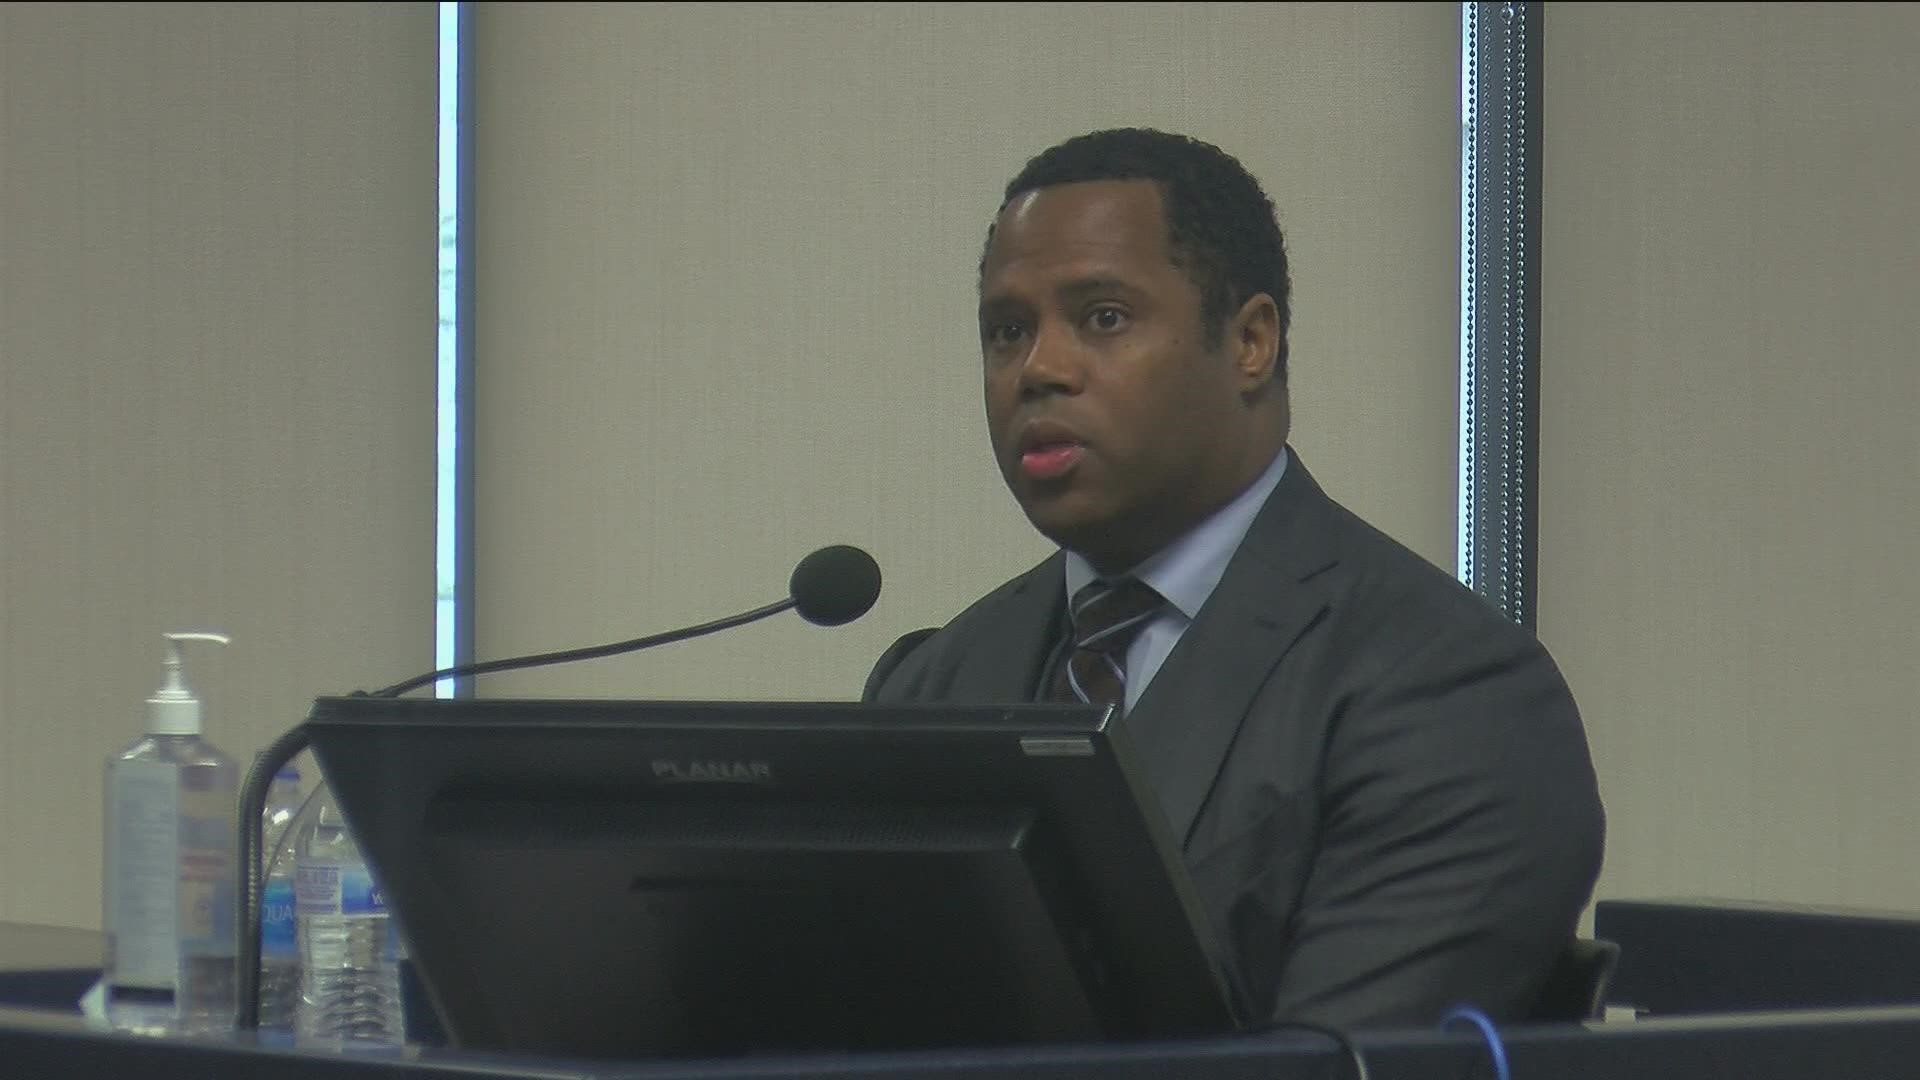 The state's first witness Wednesday is Dr. Gregory Parks, Wake Forest University. He’s a psychology expert the prosecution is hoping to use to bolster their argument